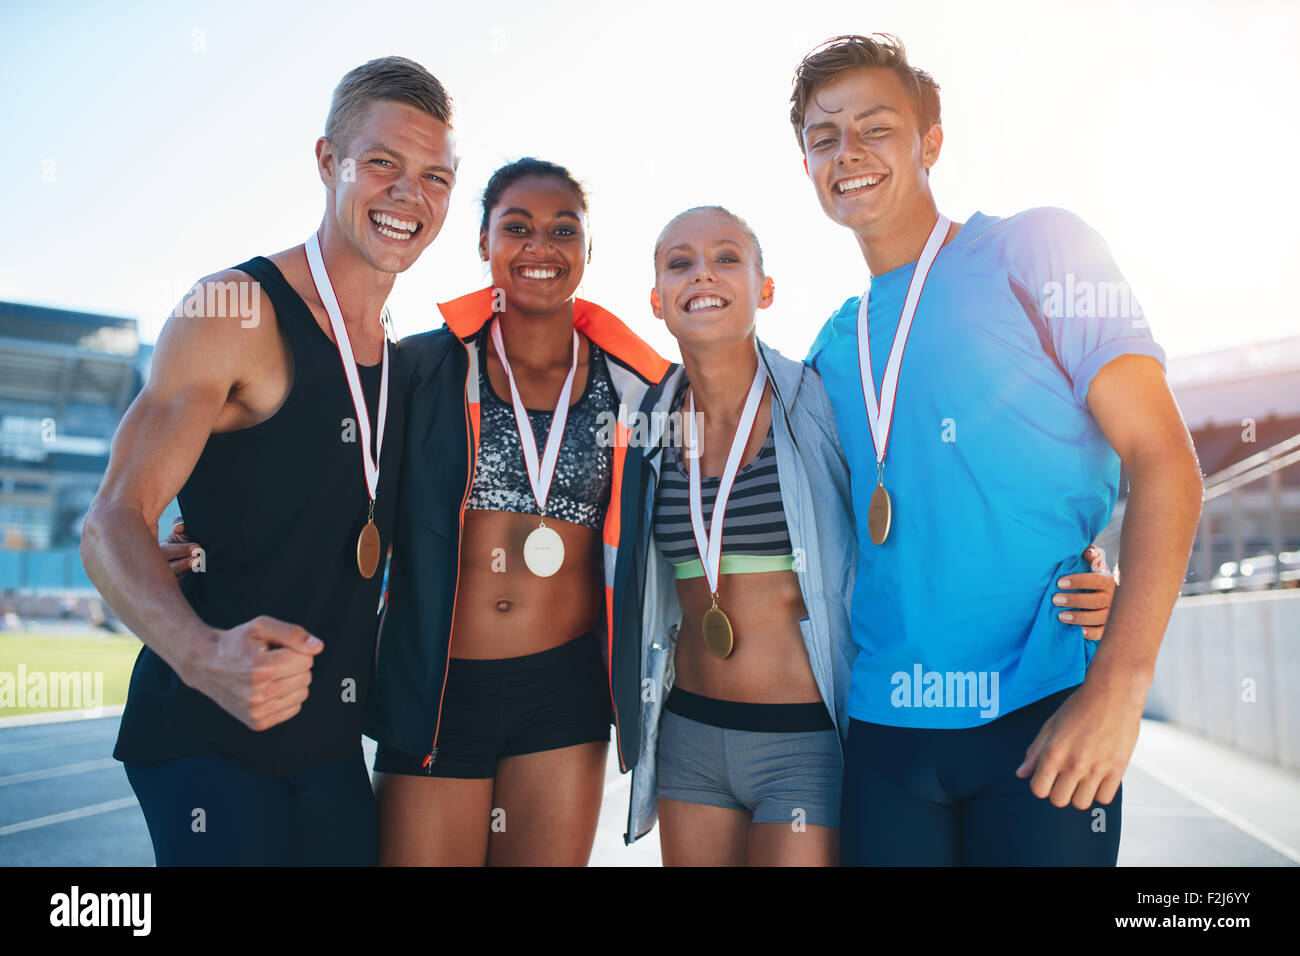 Happy multiracial athletes celebrating victory while standing together on racetrack. Group of runner with medals winning a compe Stock Photo